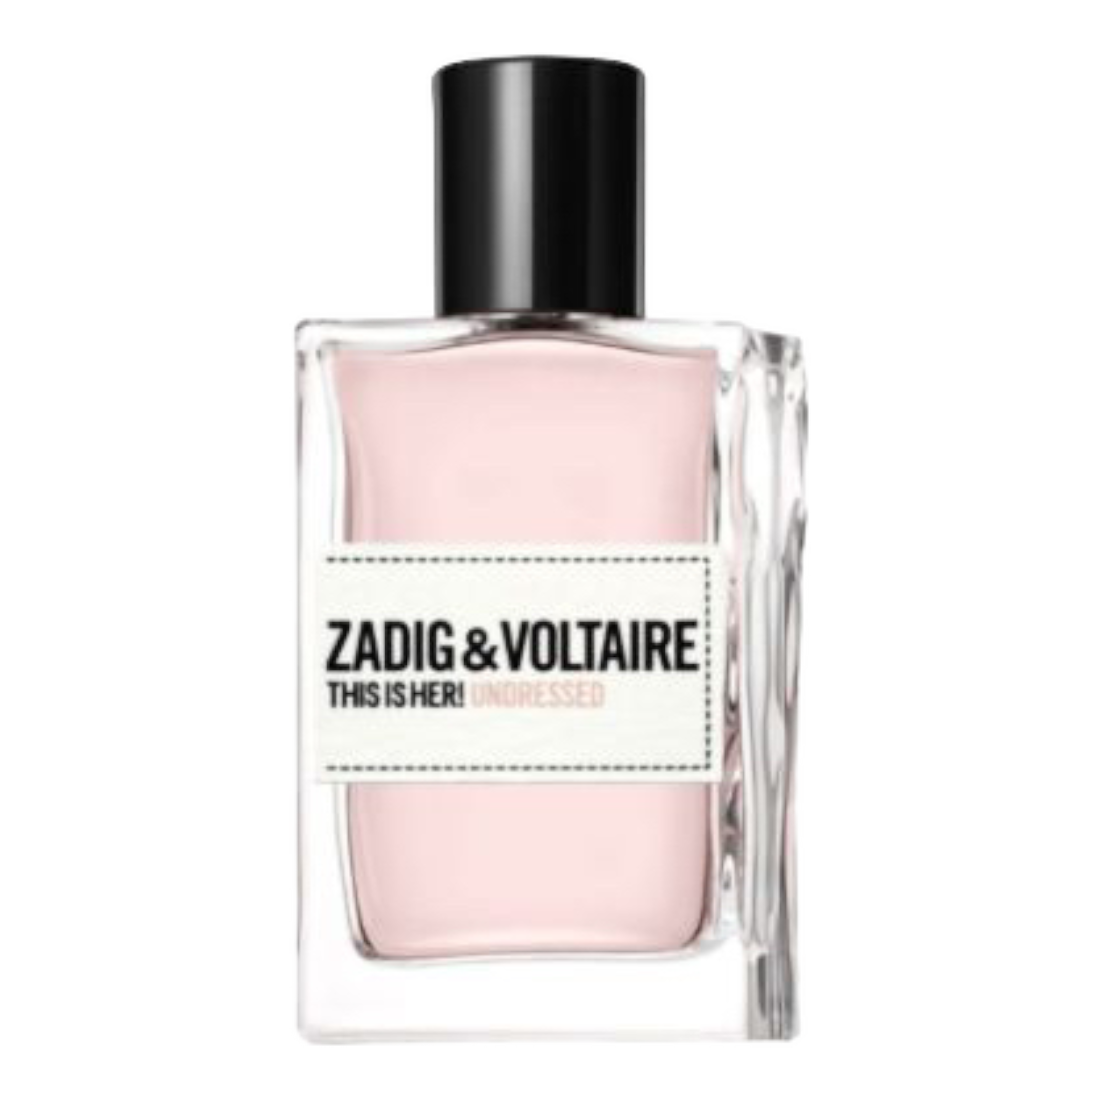 ZADIG VOLTAIRE THIS IS HER UNDRESSED EDP 100ML SPRAY TESTER